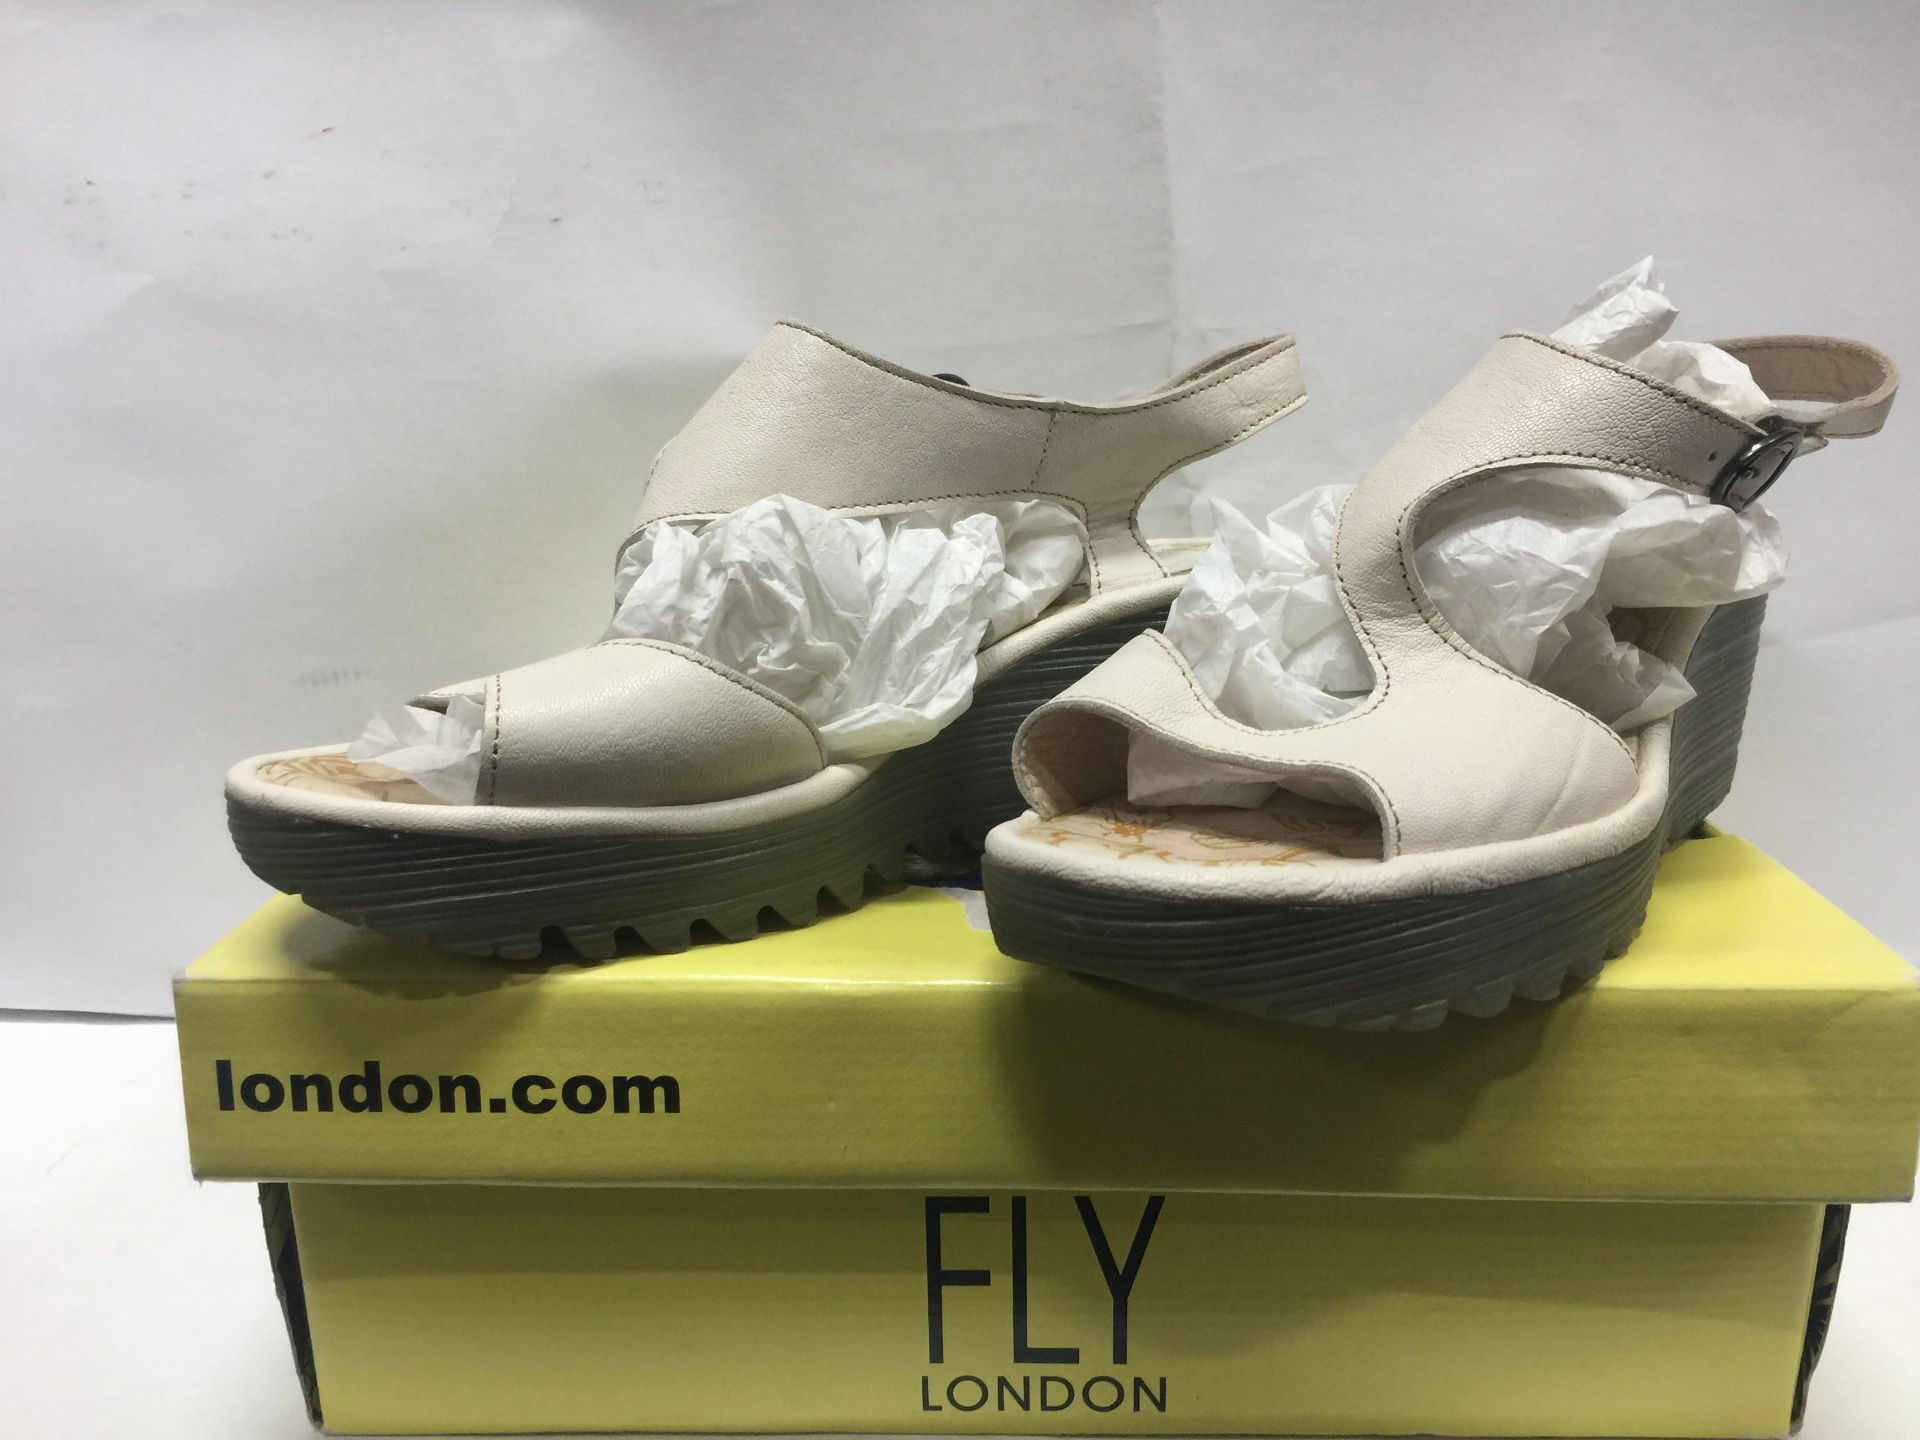 21 x Fly London Women's Sandles Mixed Sizes, Styles and Colours Size Ranging EU 36 - EU 41 - Custome - Image 3 of 6